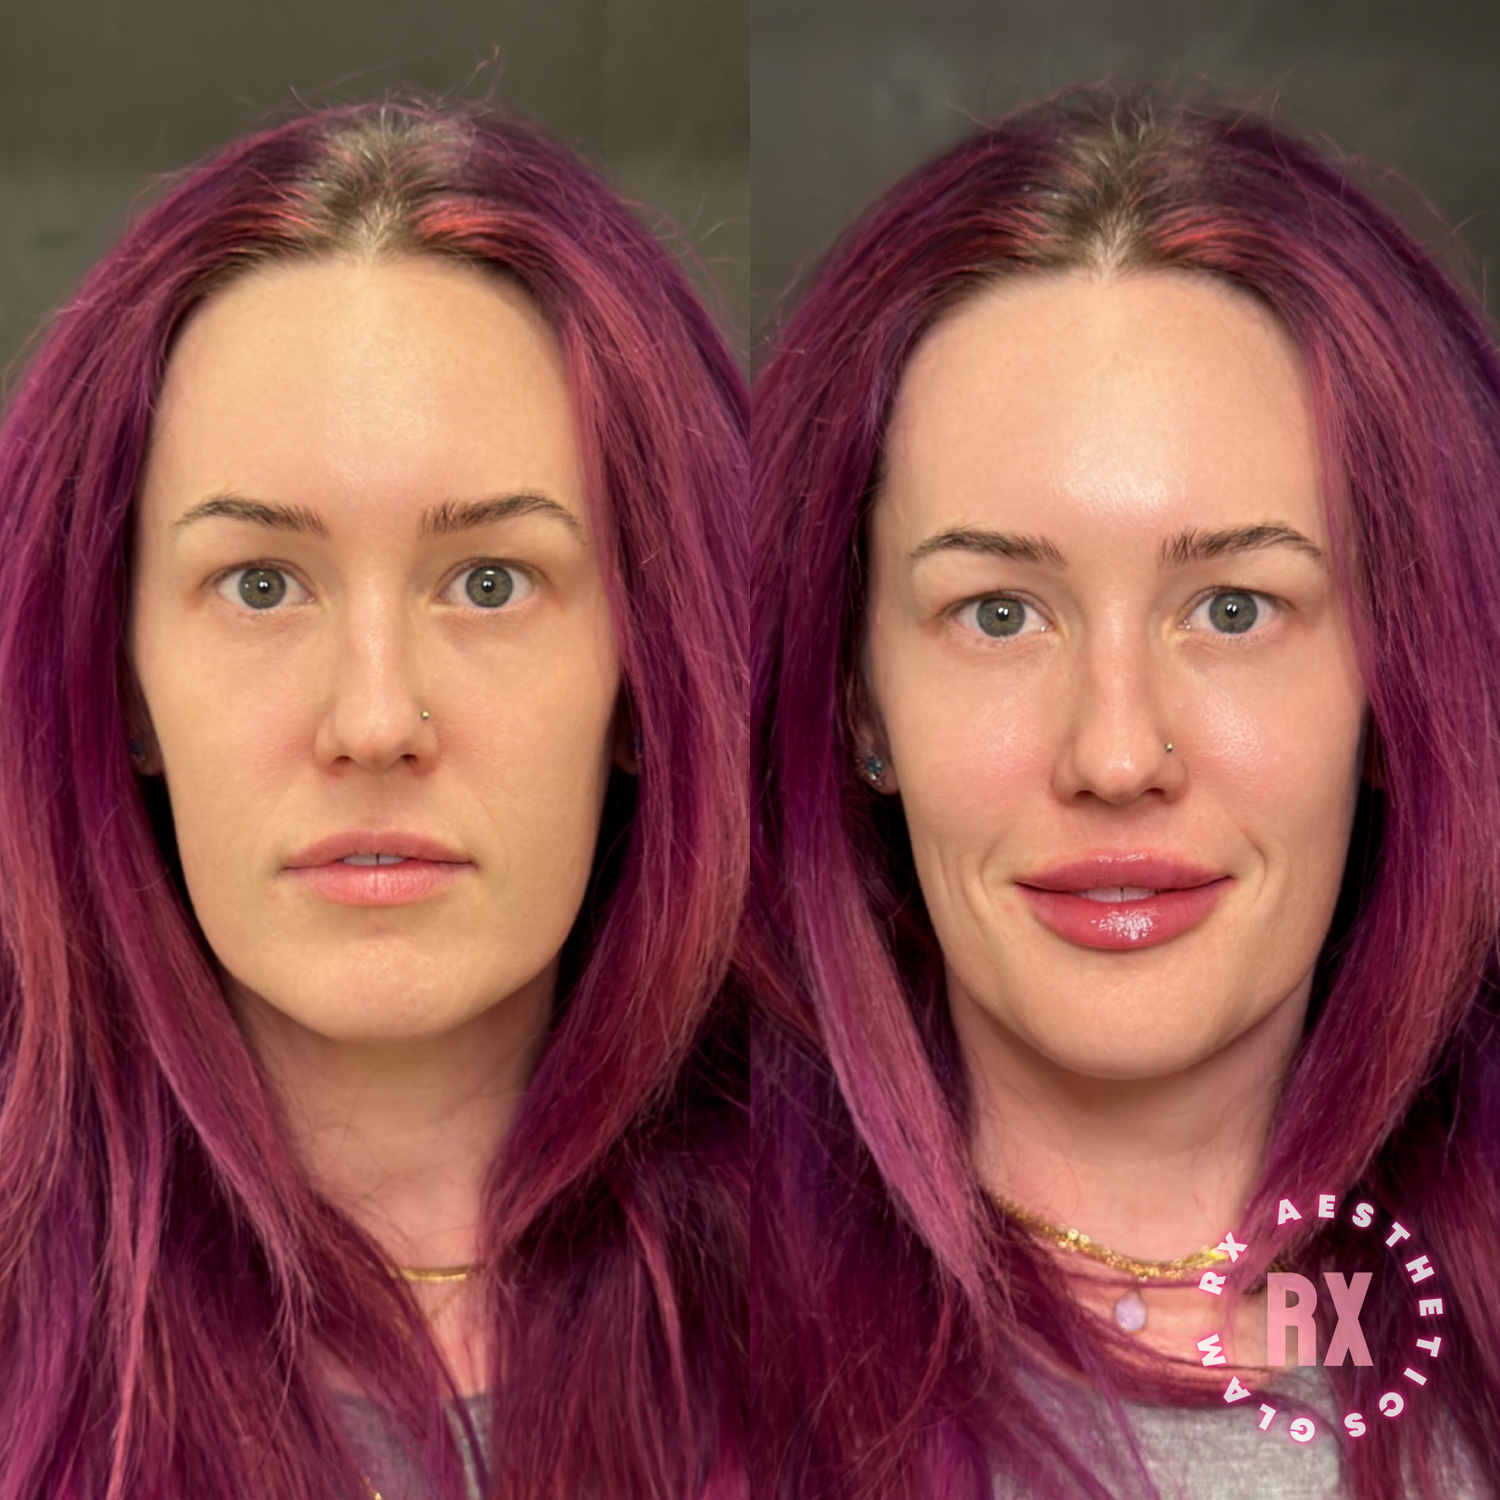 A split photo showing a woman with purple hair before and after getting lip filler injections